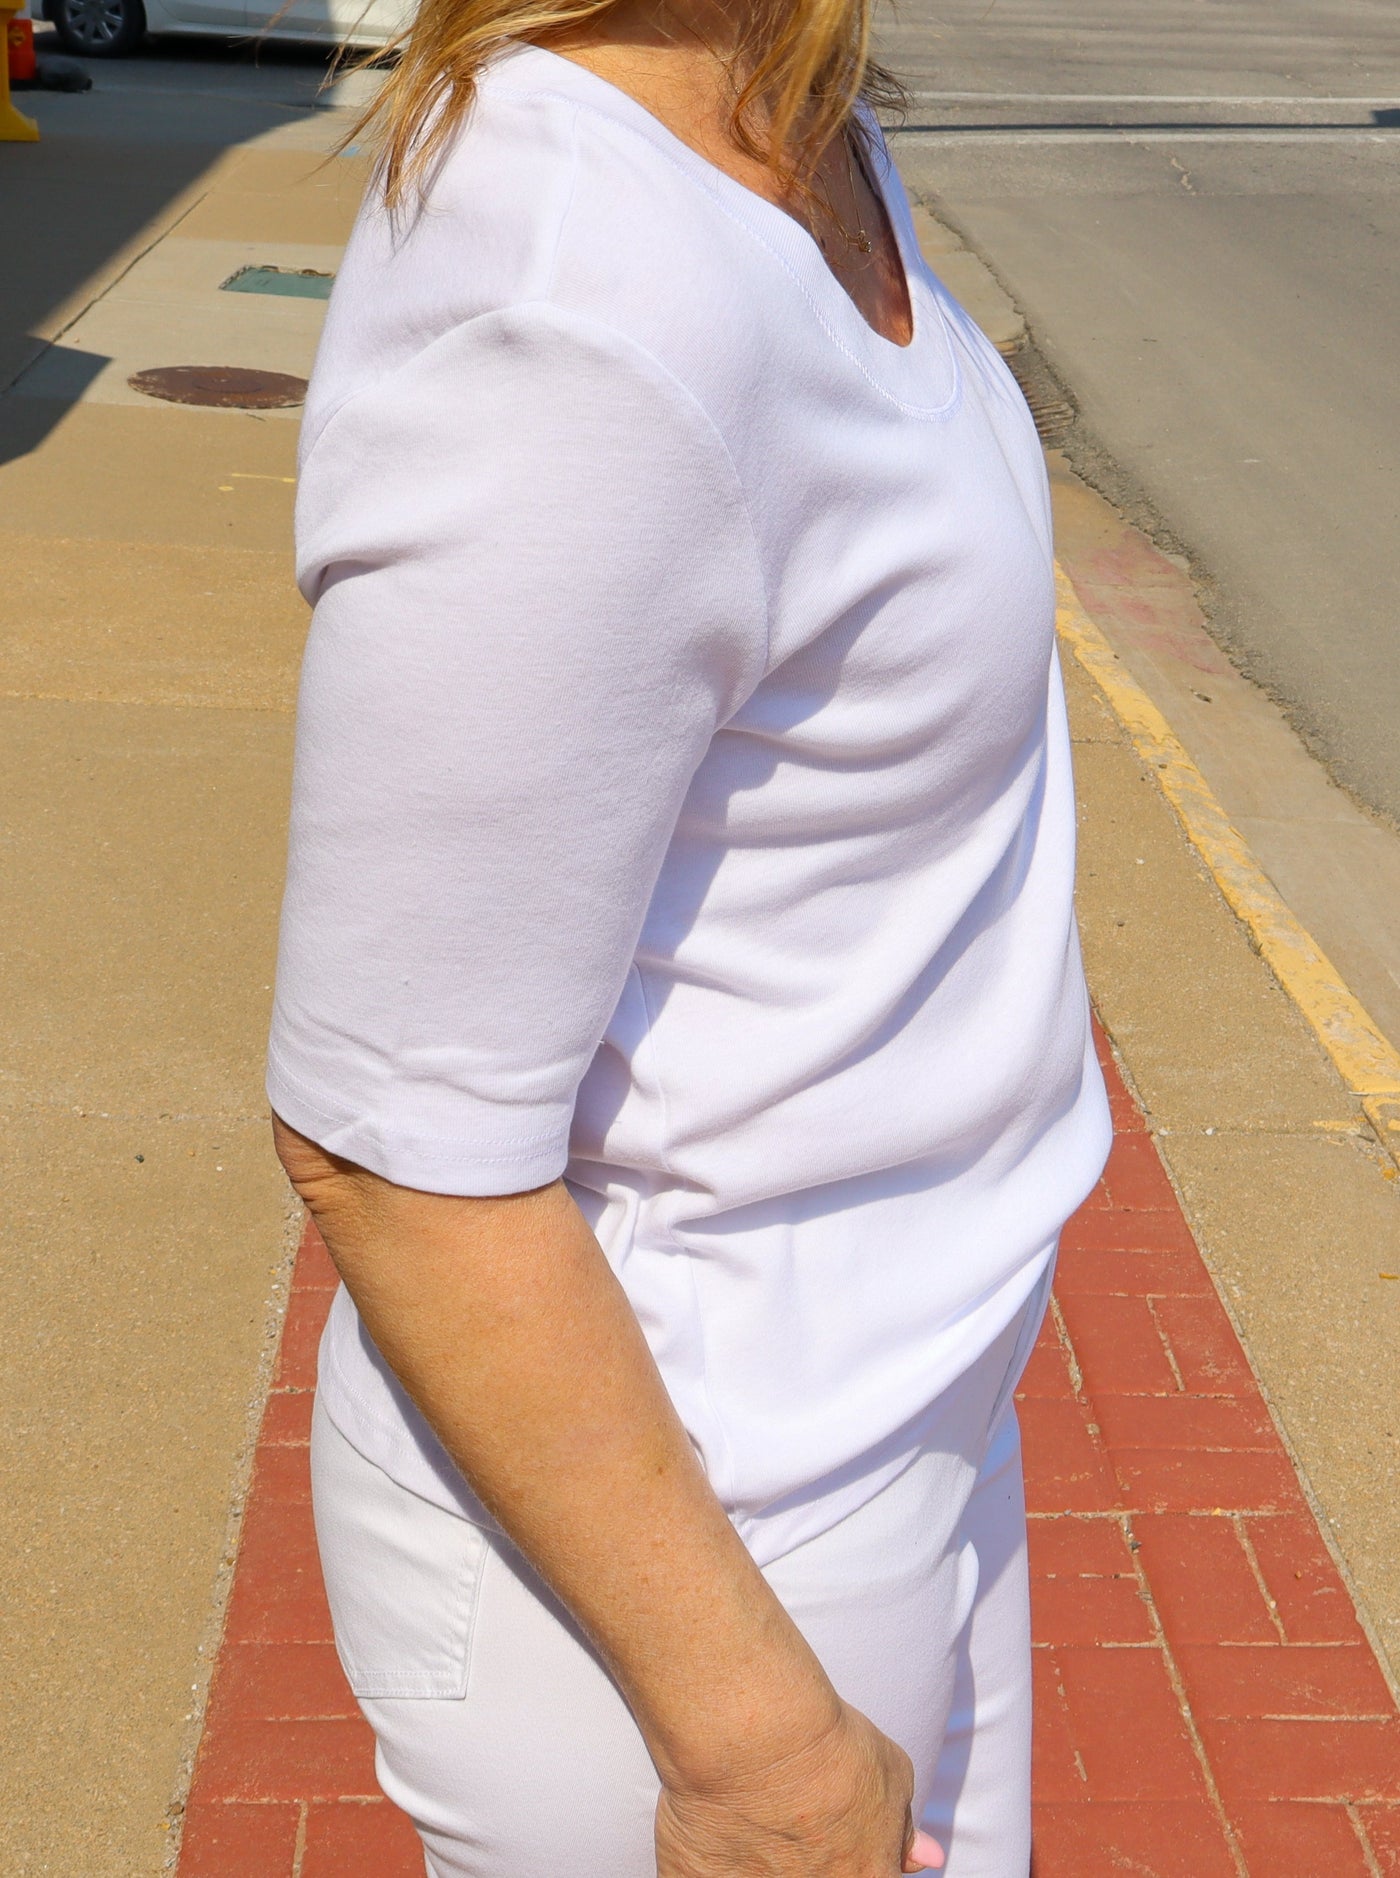 Model is wearing a fitted scoop neck white tee shirt.